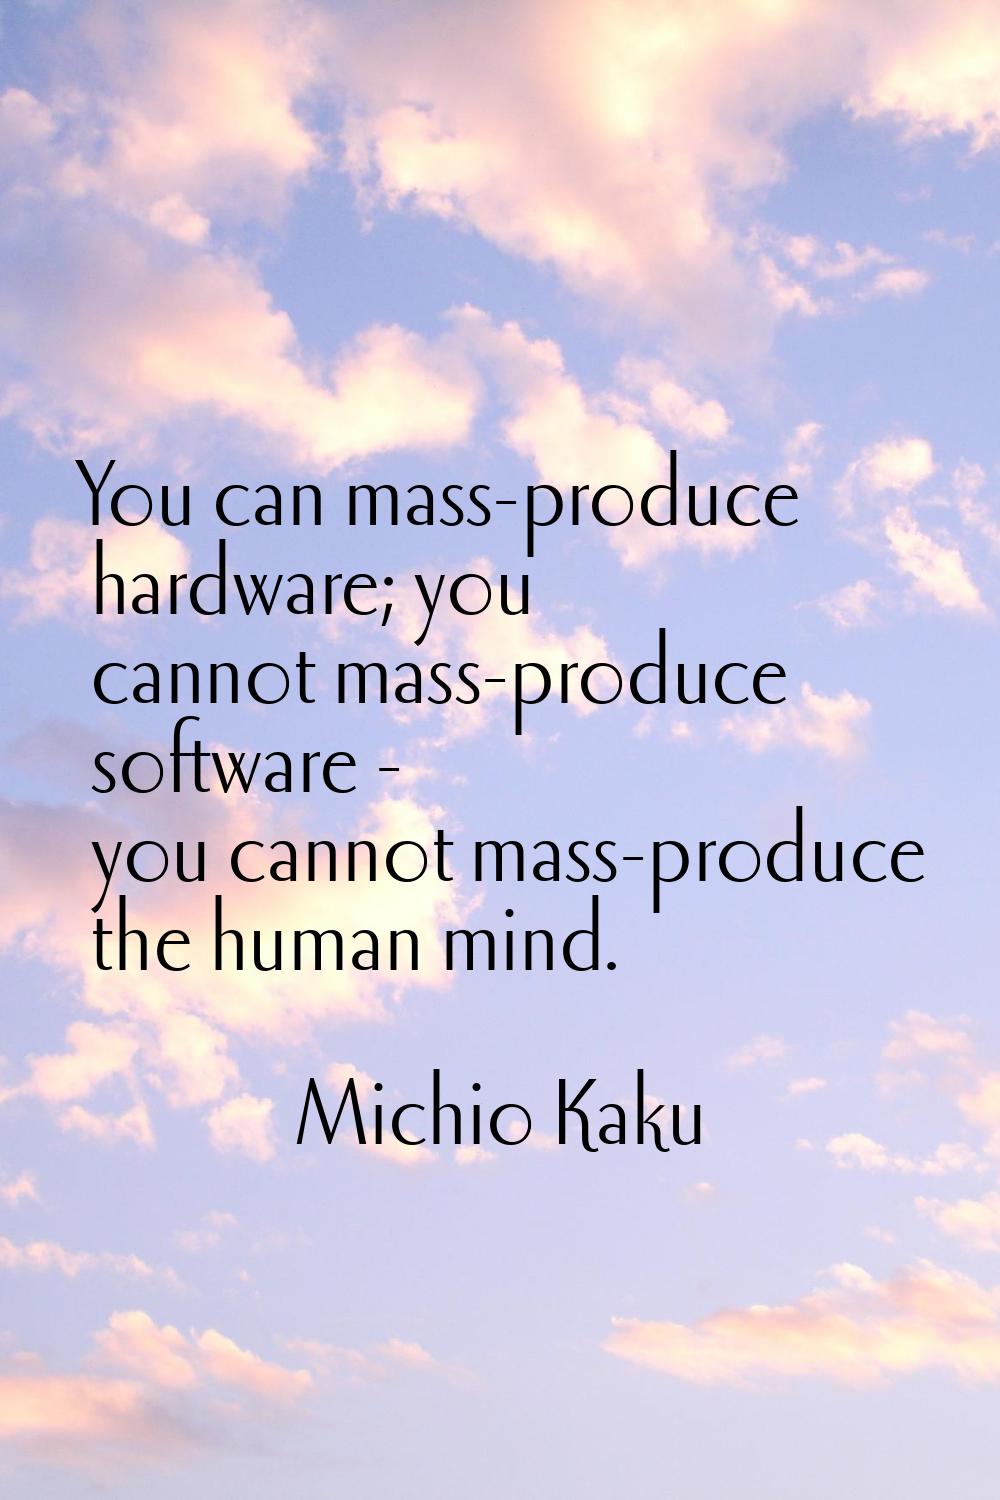 You can mass-produce hardware; you cannot mass-produce software - you cannot mass-produce the human